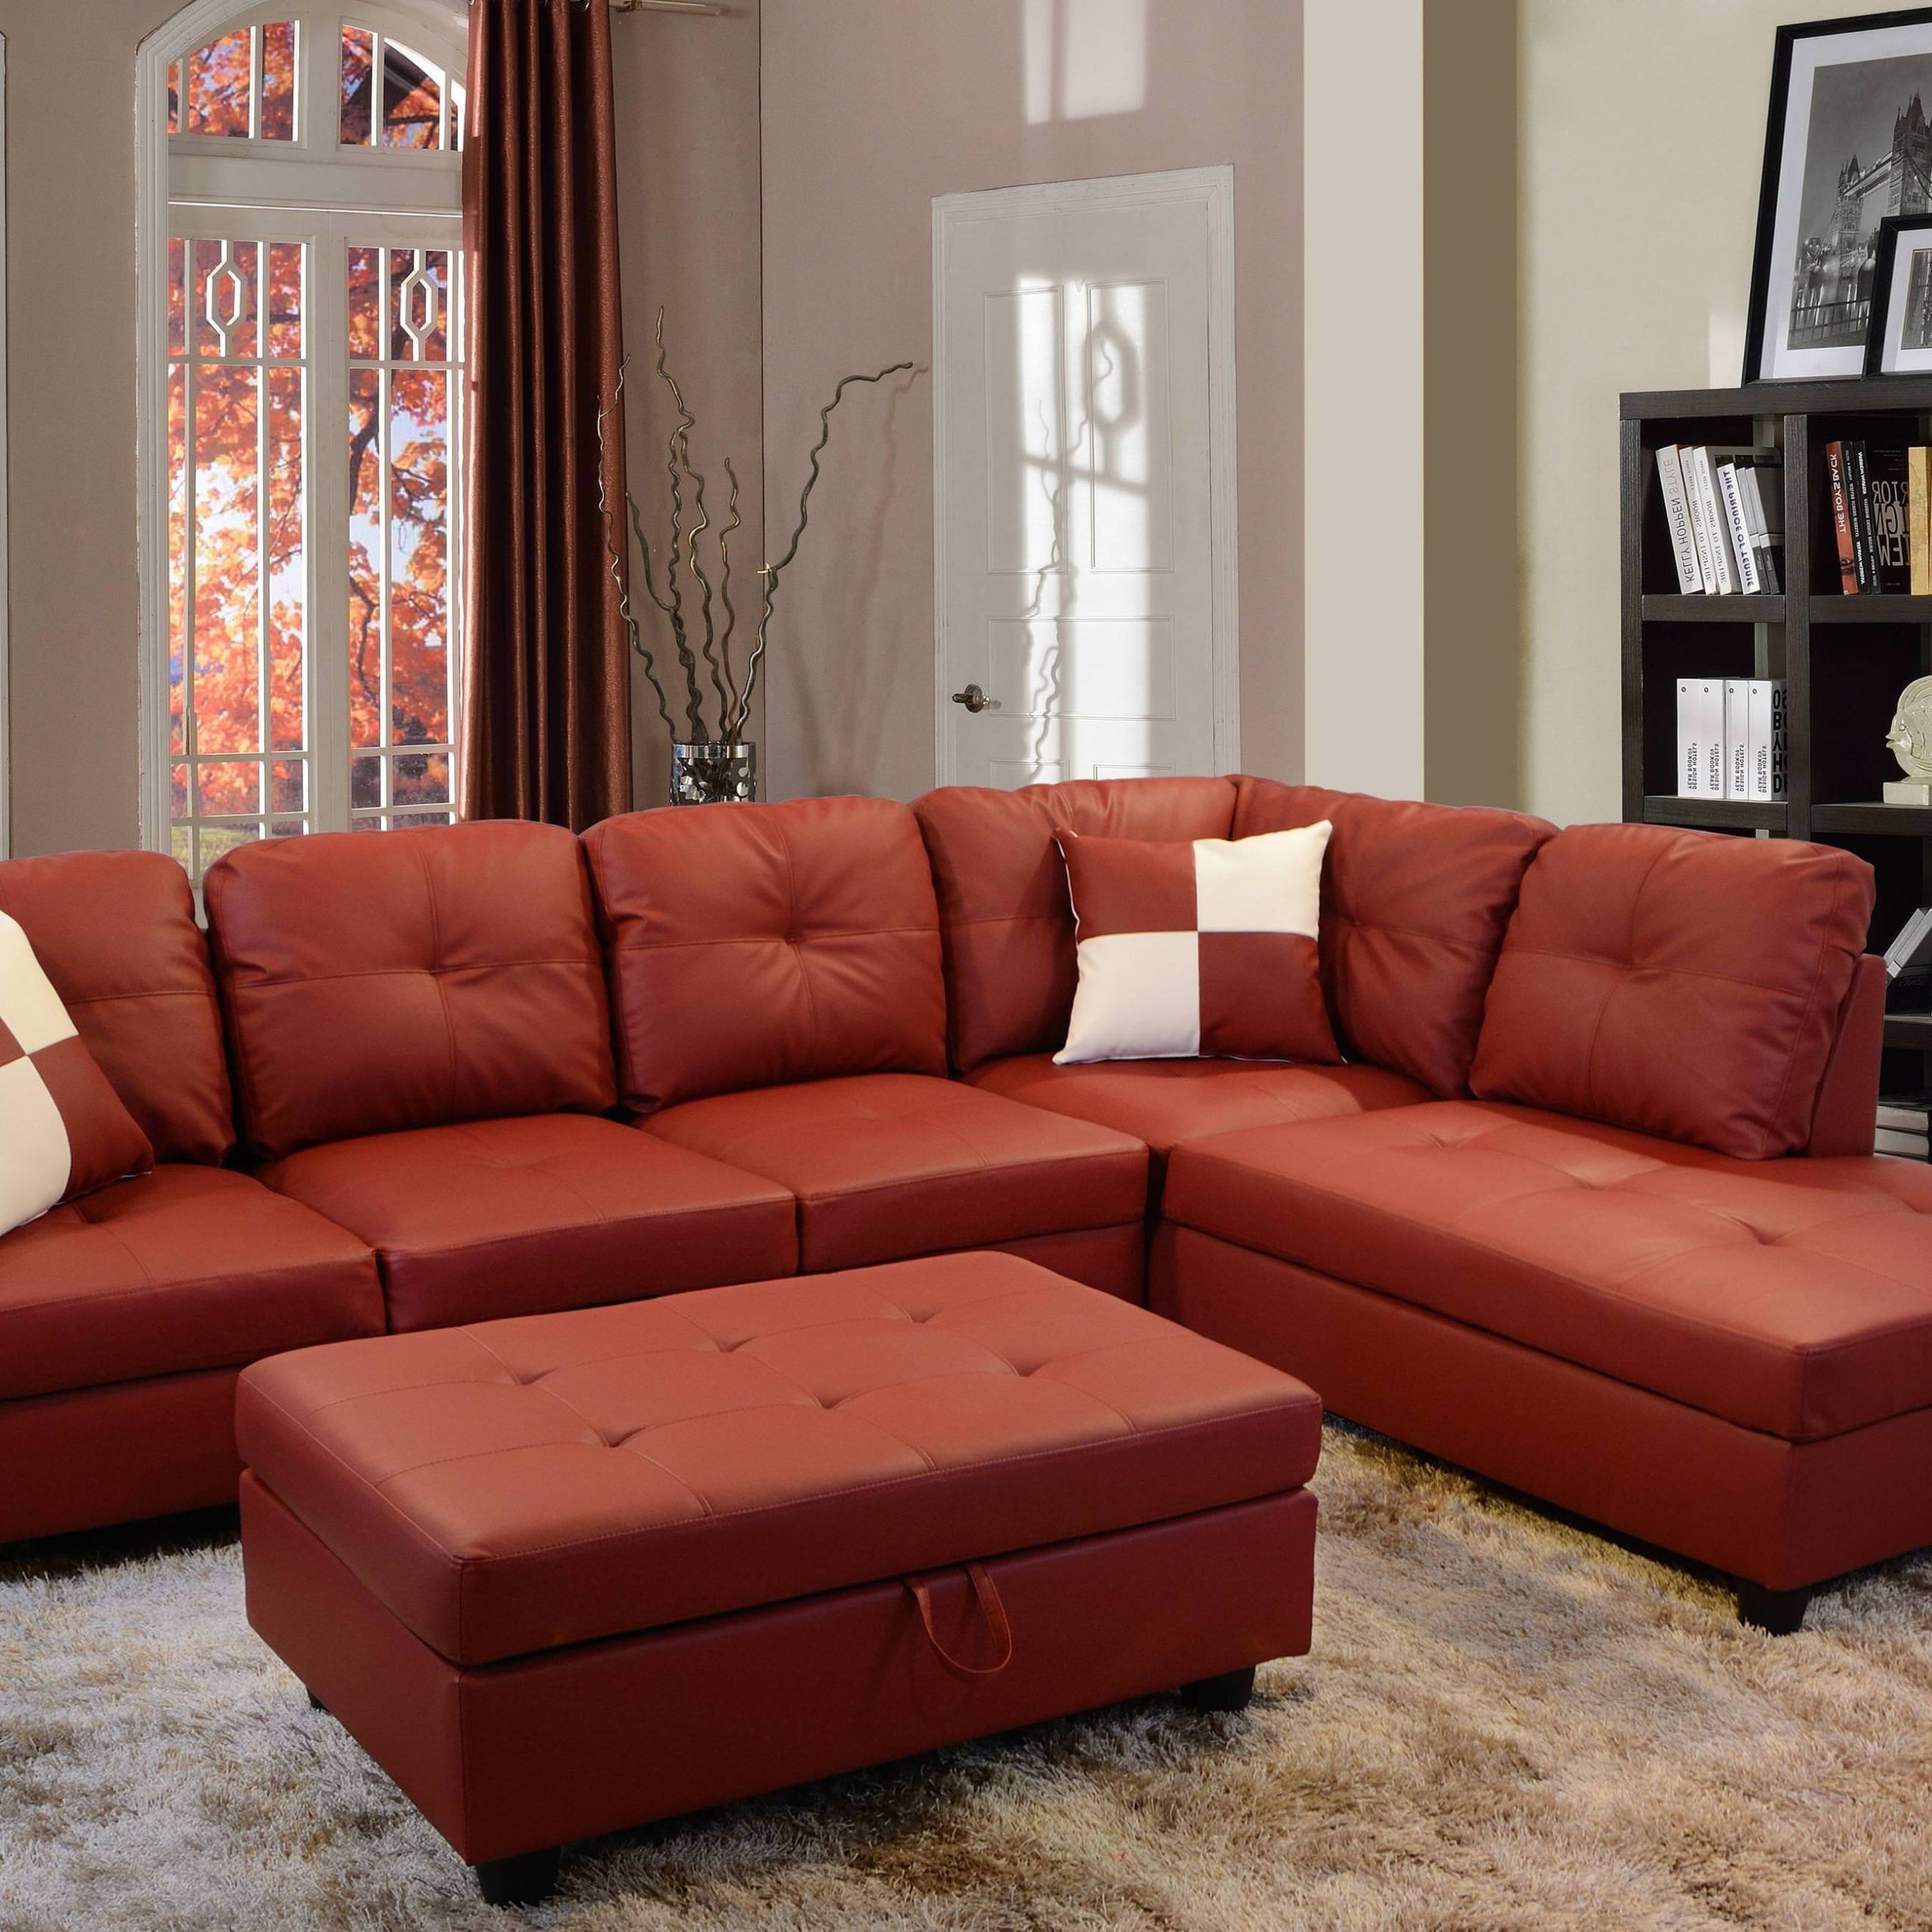 Raphael Faux Leather Left Facing Sectional Sofa With Ottoman, Multiple Regarding Sofas With Ottomans (View 17 of 20)